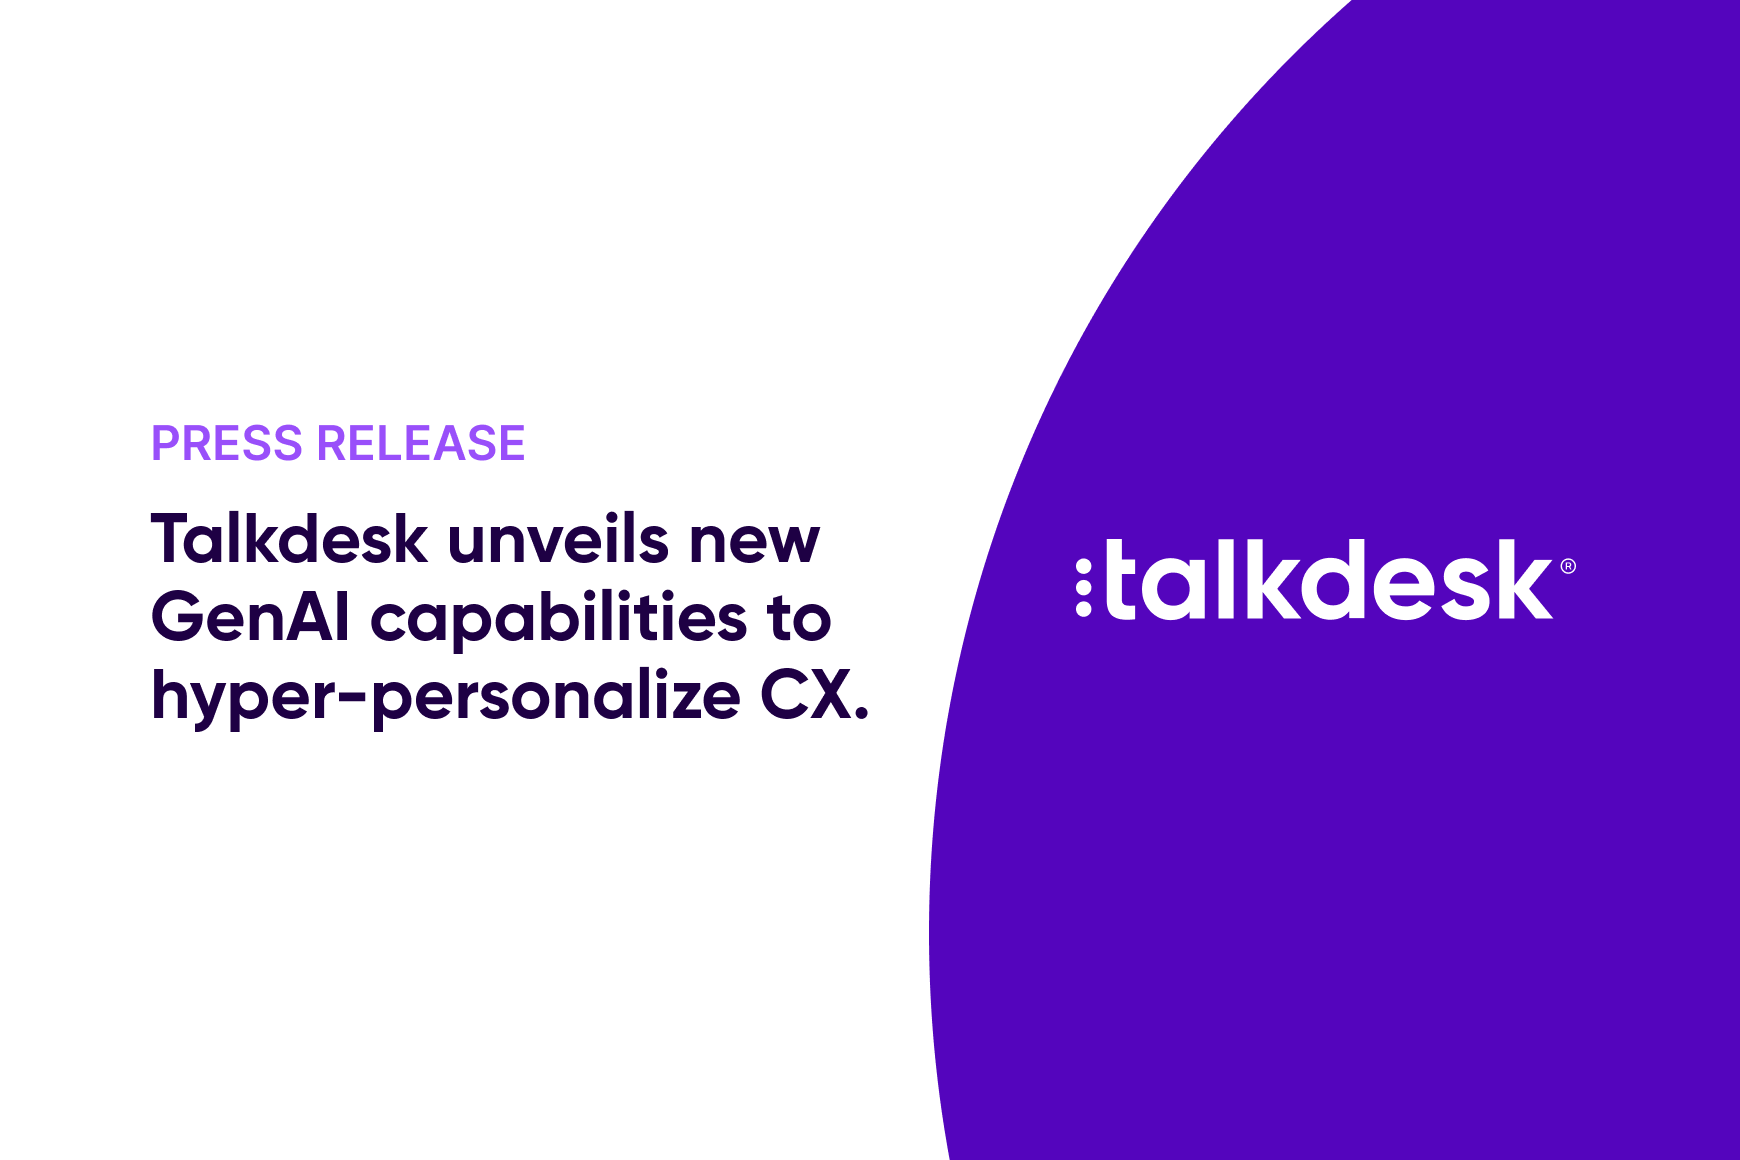 Talkdesk unveils new generative artificial intelligence capabilities to hyper-personalize customer experience